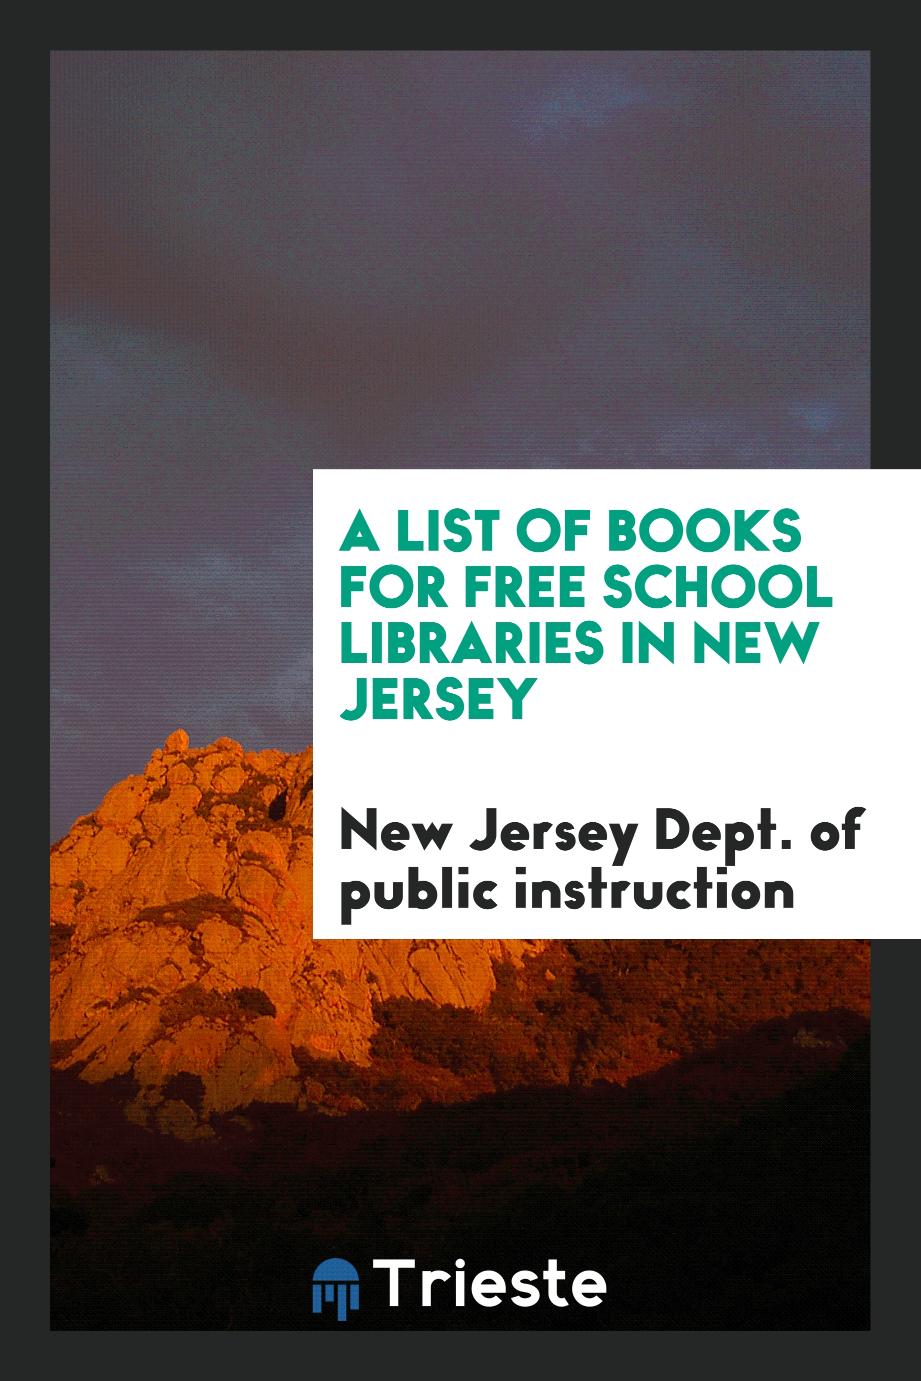 A List of Books for Free School Libraries in New Jersey